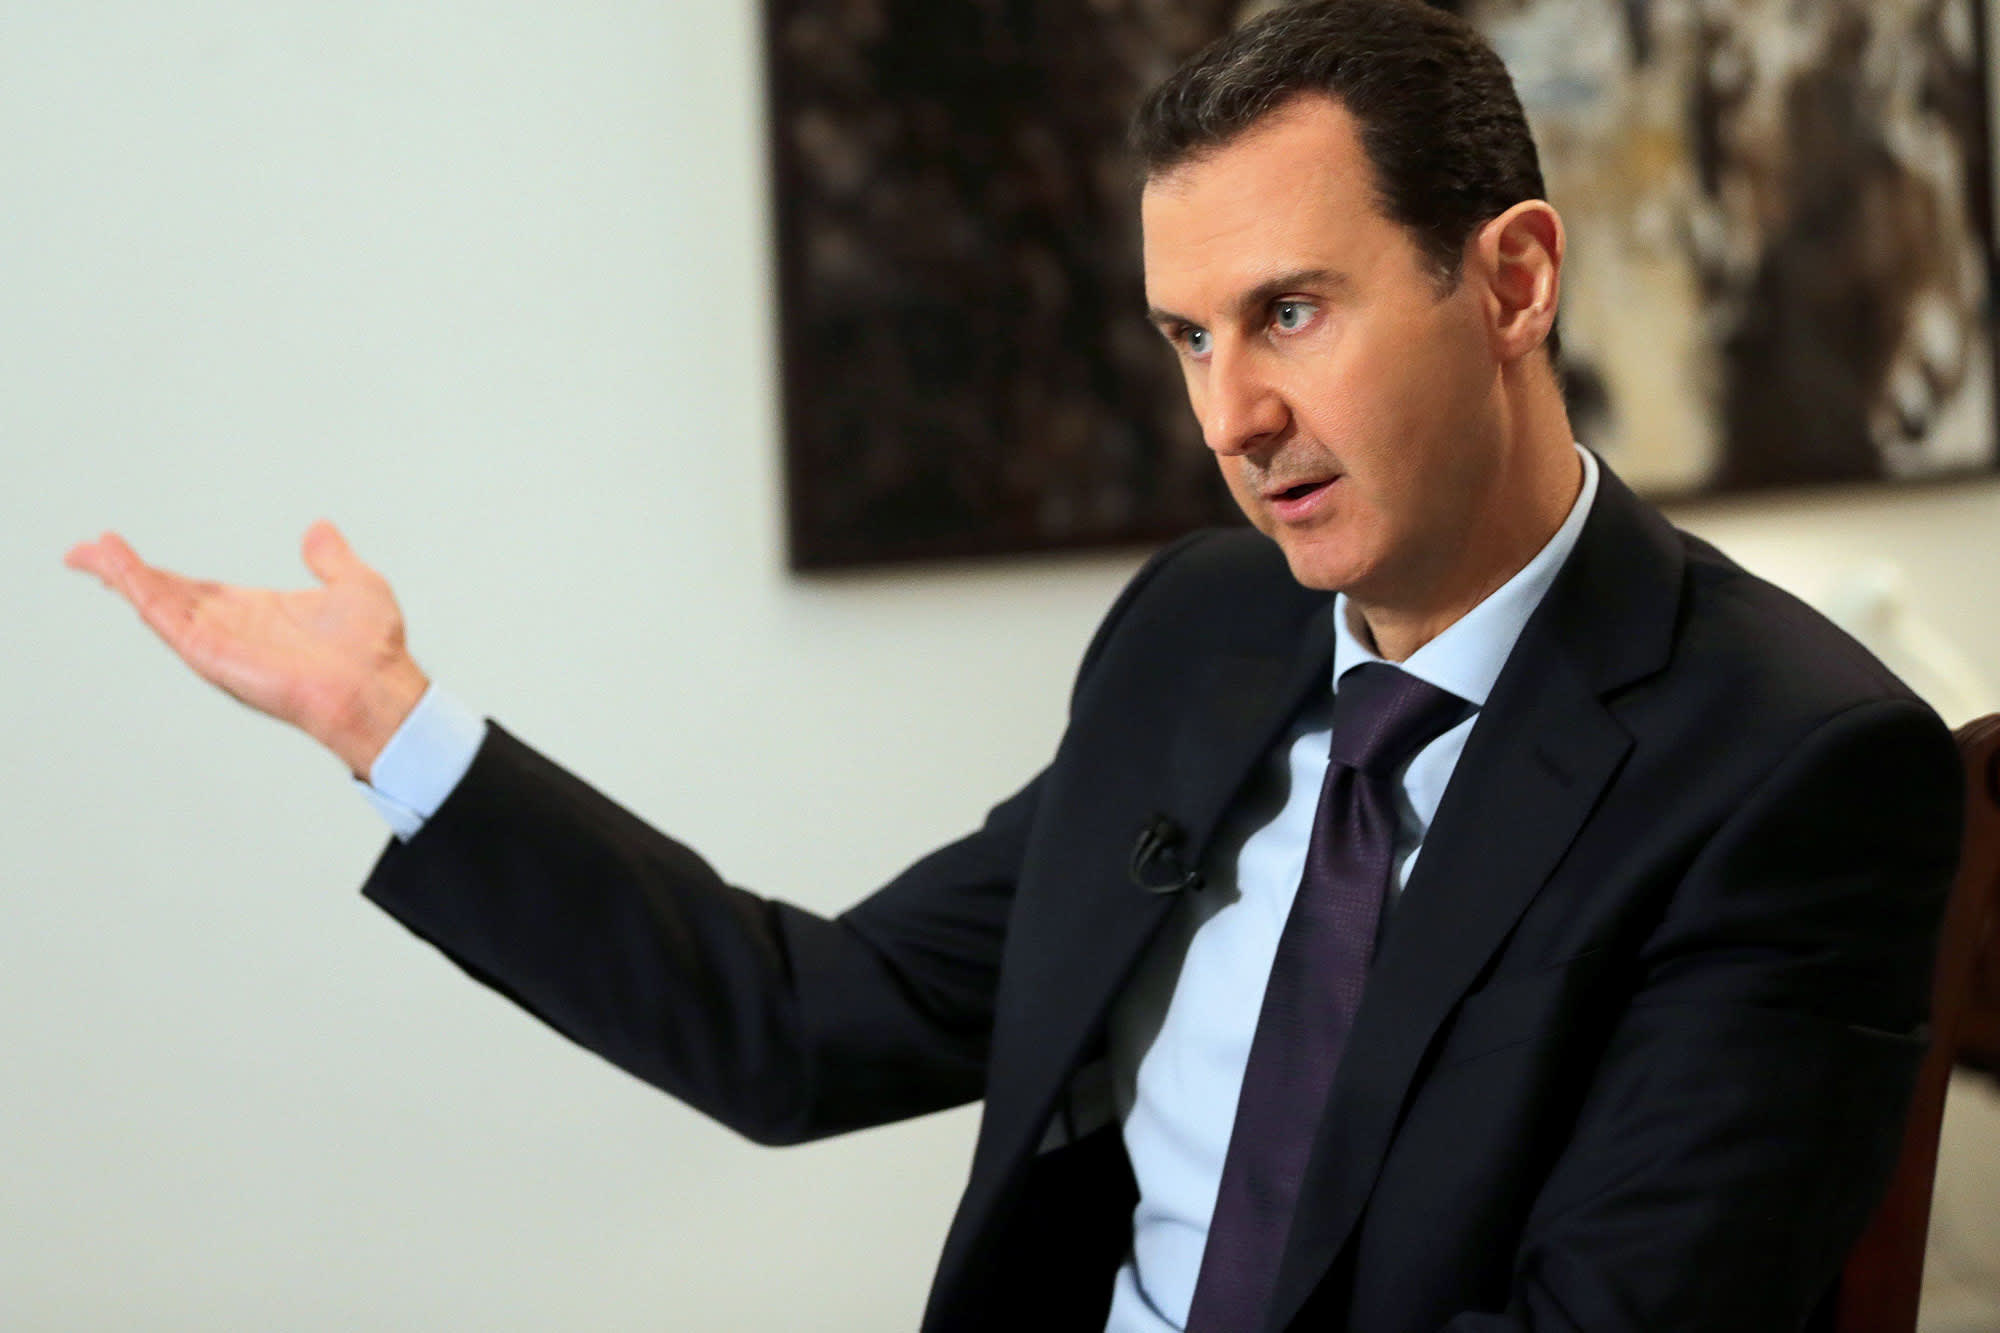 Syria's Assad replaces prime minister: State media - CNBC